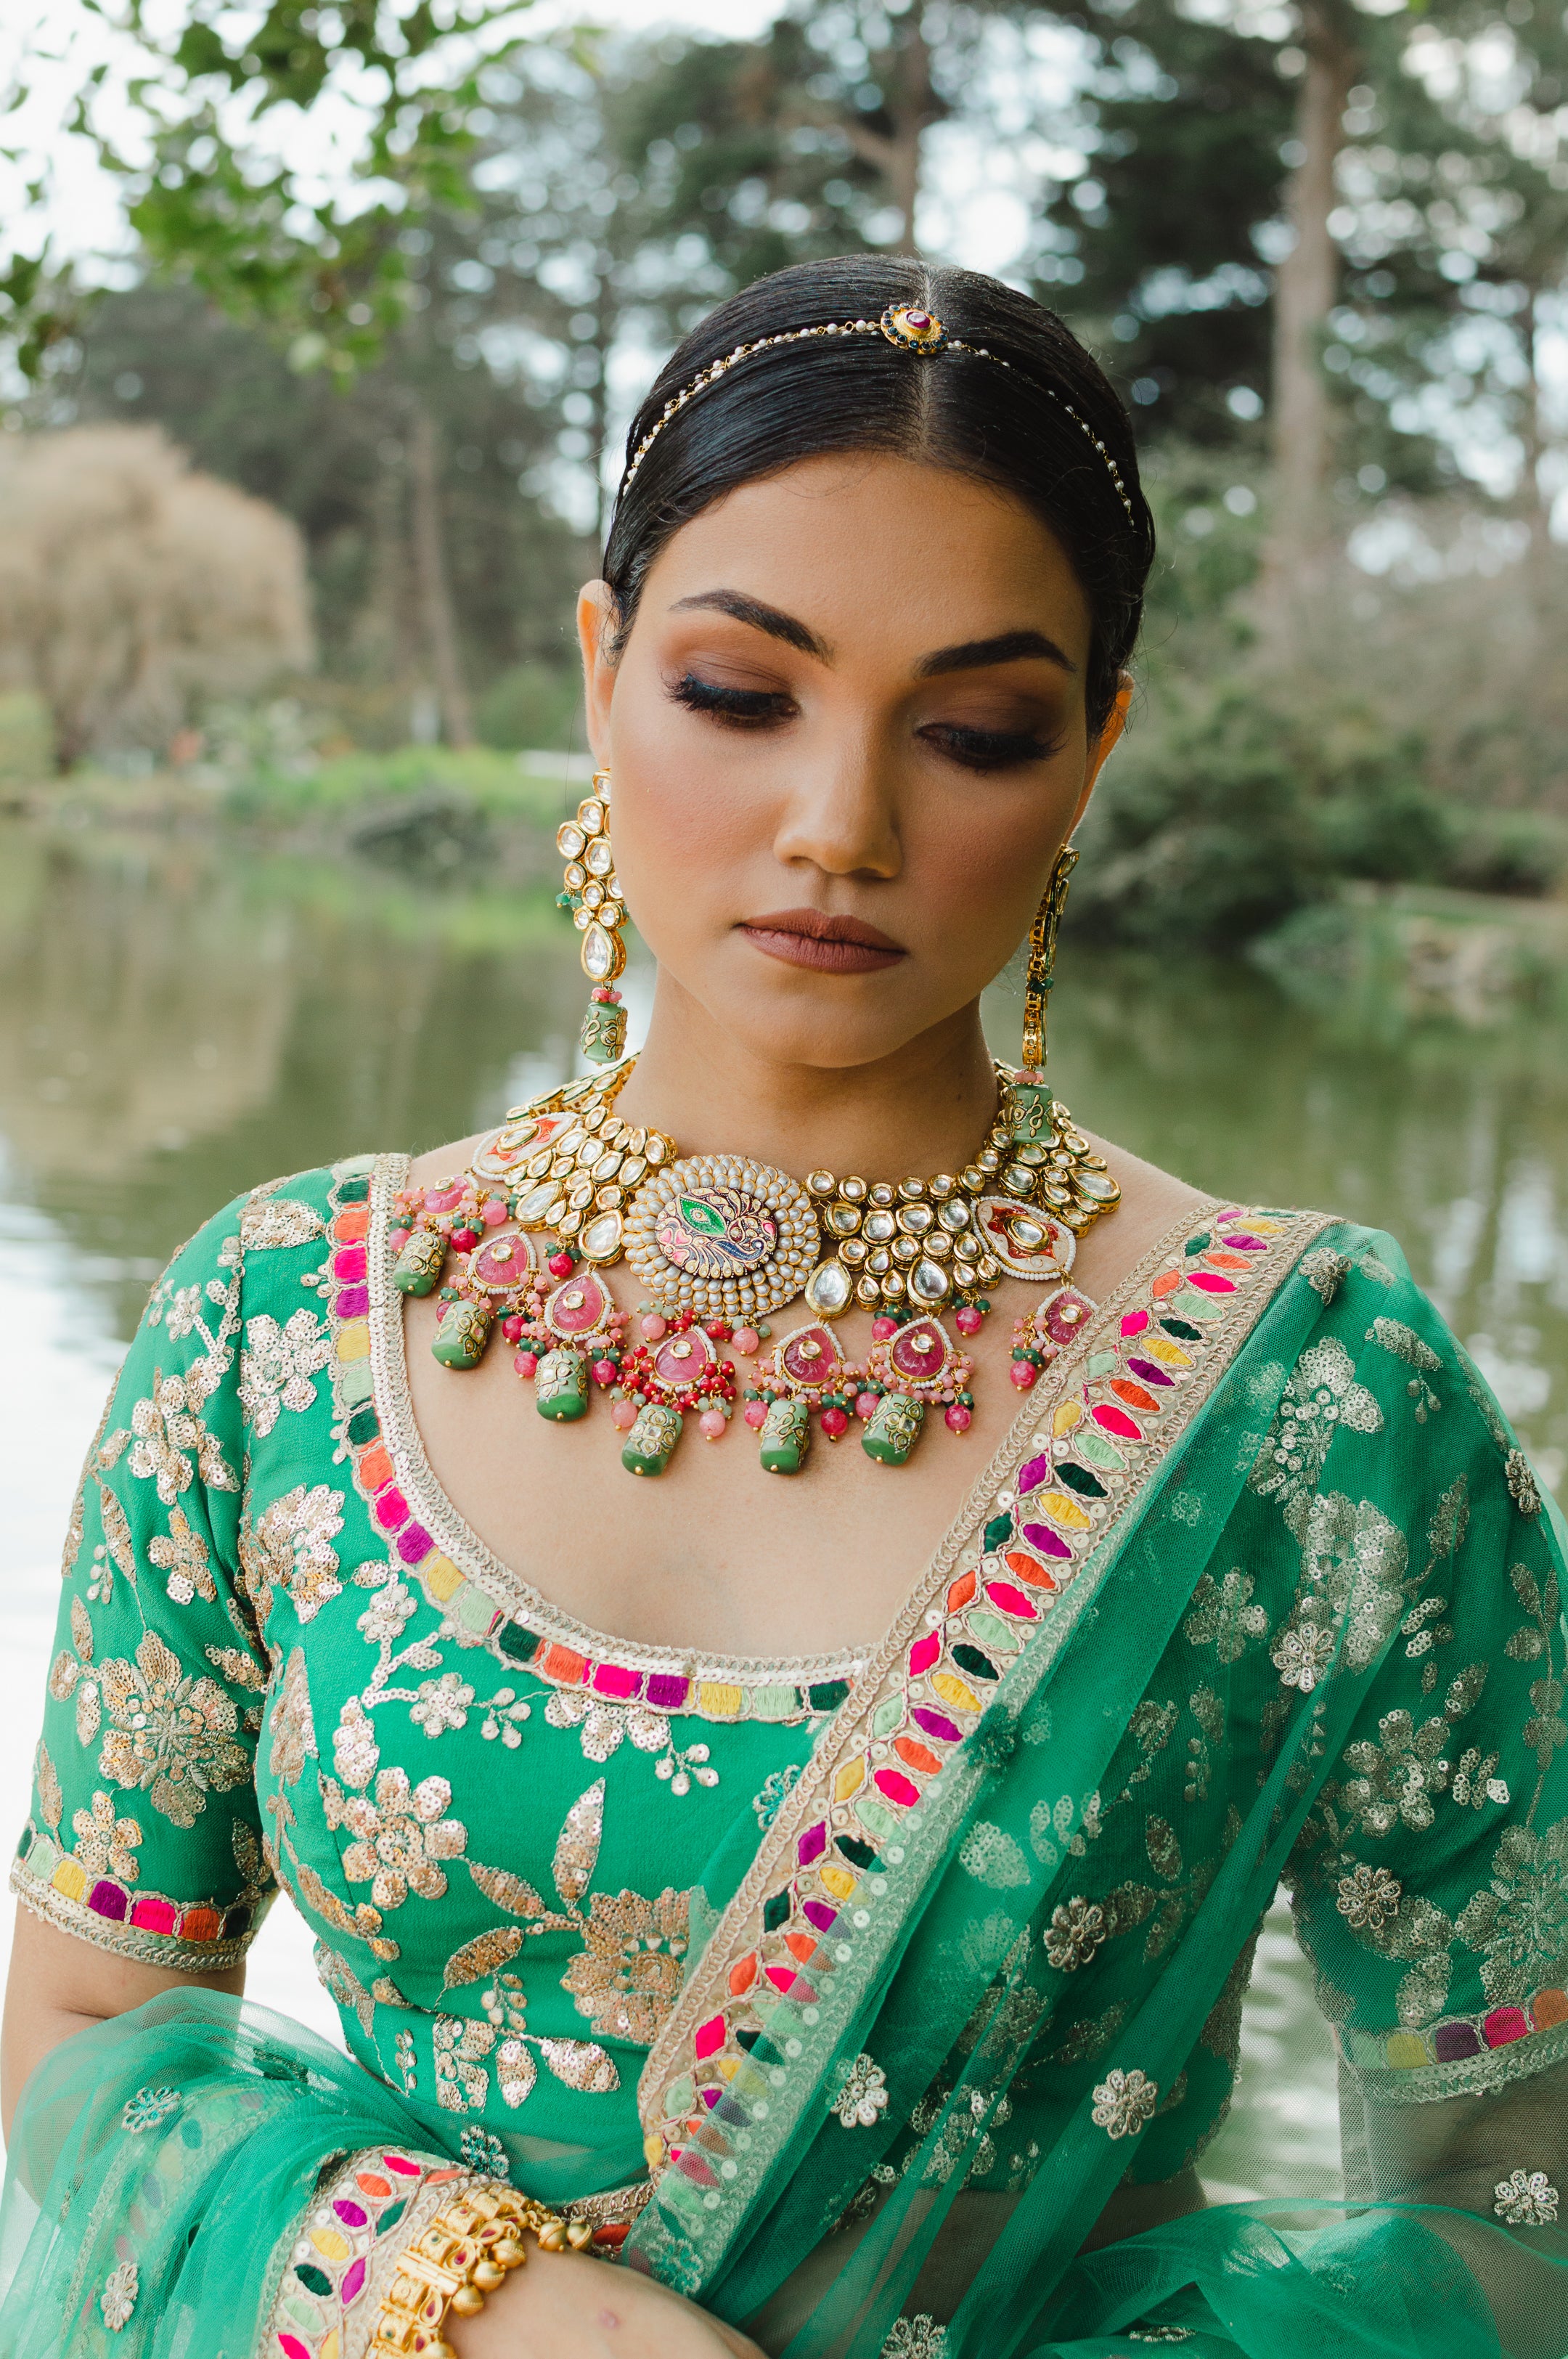 Kashi Jewellers - Contemporary design, traditional craftsmanship,  intricately designed to make you feel like a queen! Fitting for a bridal  ensemble that loves traditional jewellery with a touch of modern glam.  Explore